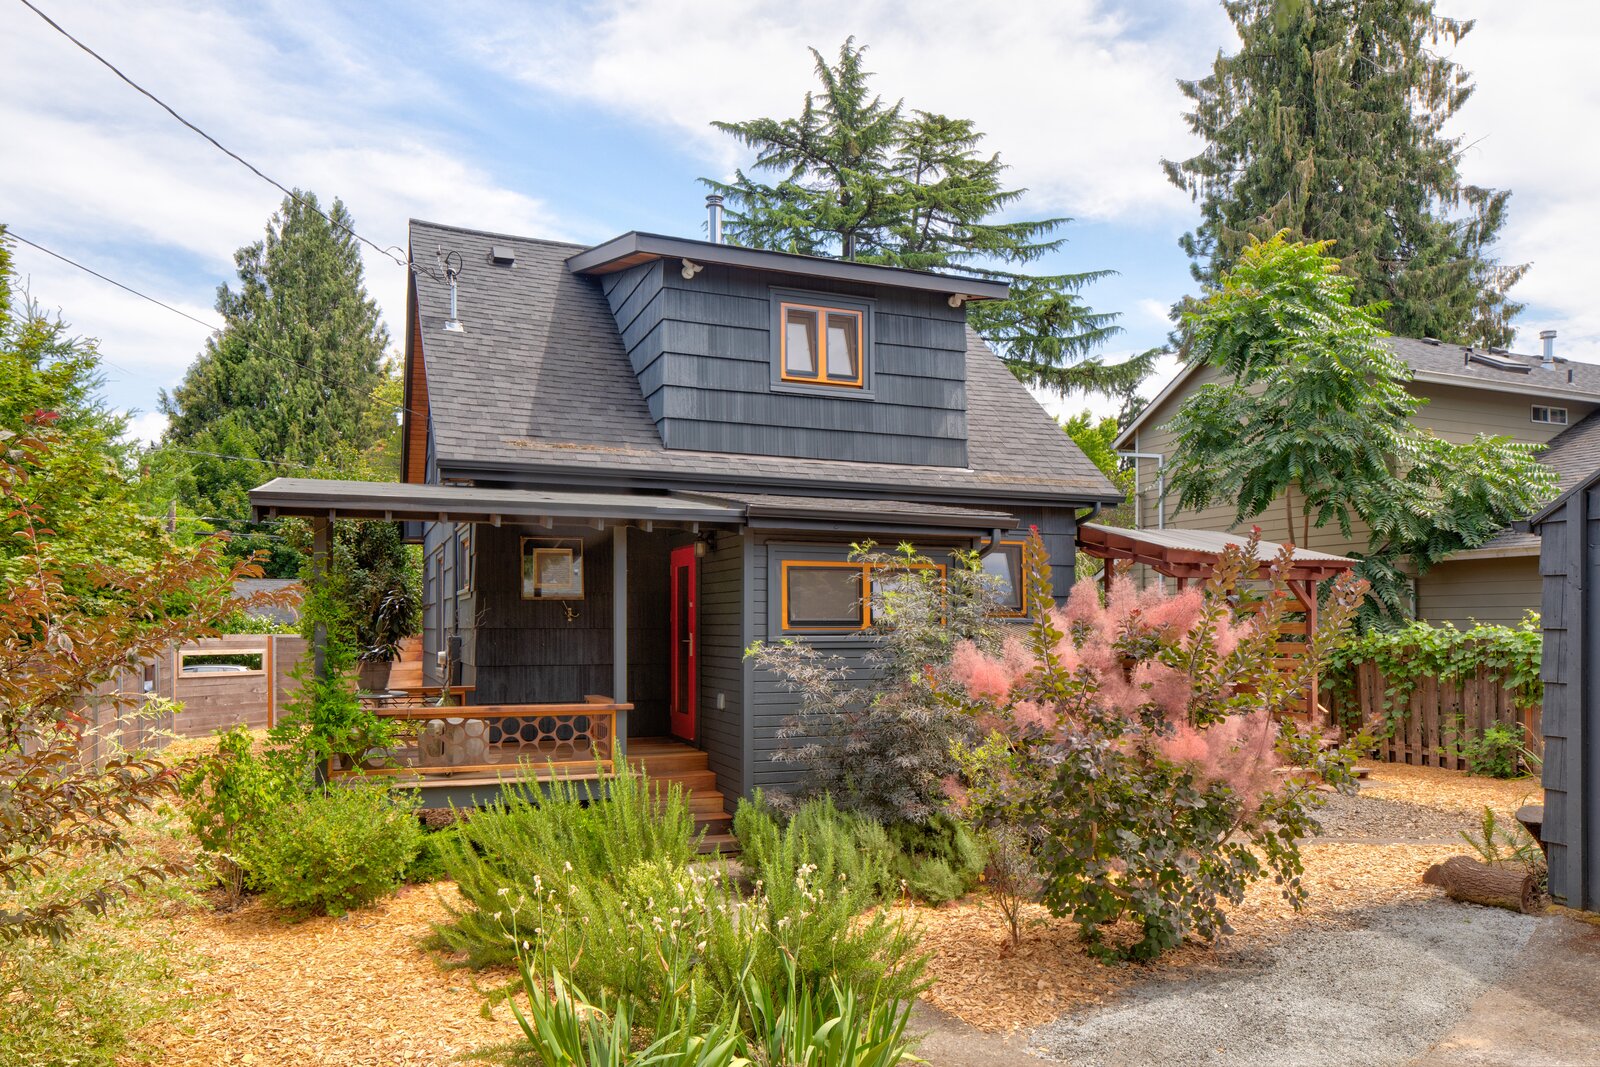 A Carpenter Turns a Sagging Portland Bungalow Into a Sustainable Family Home